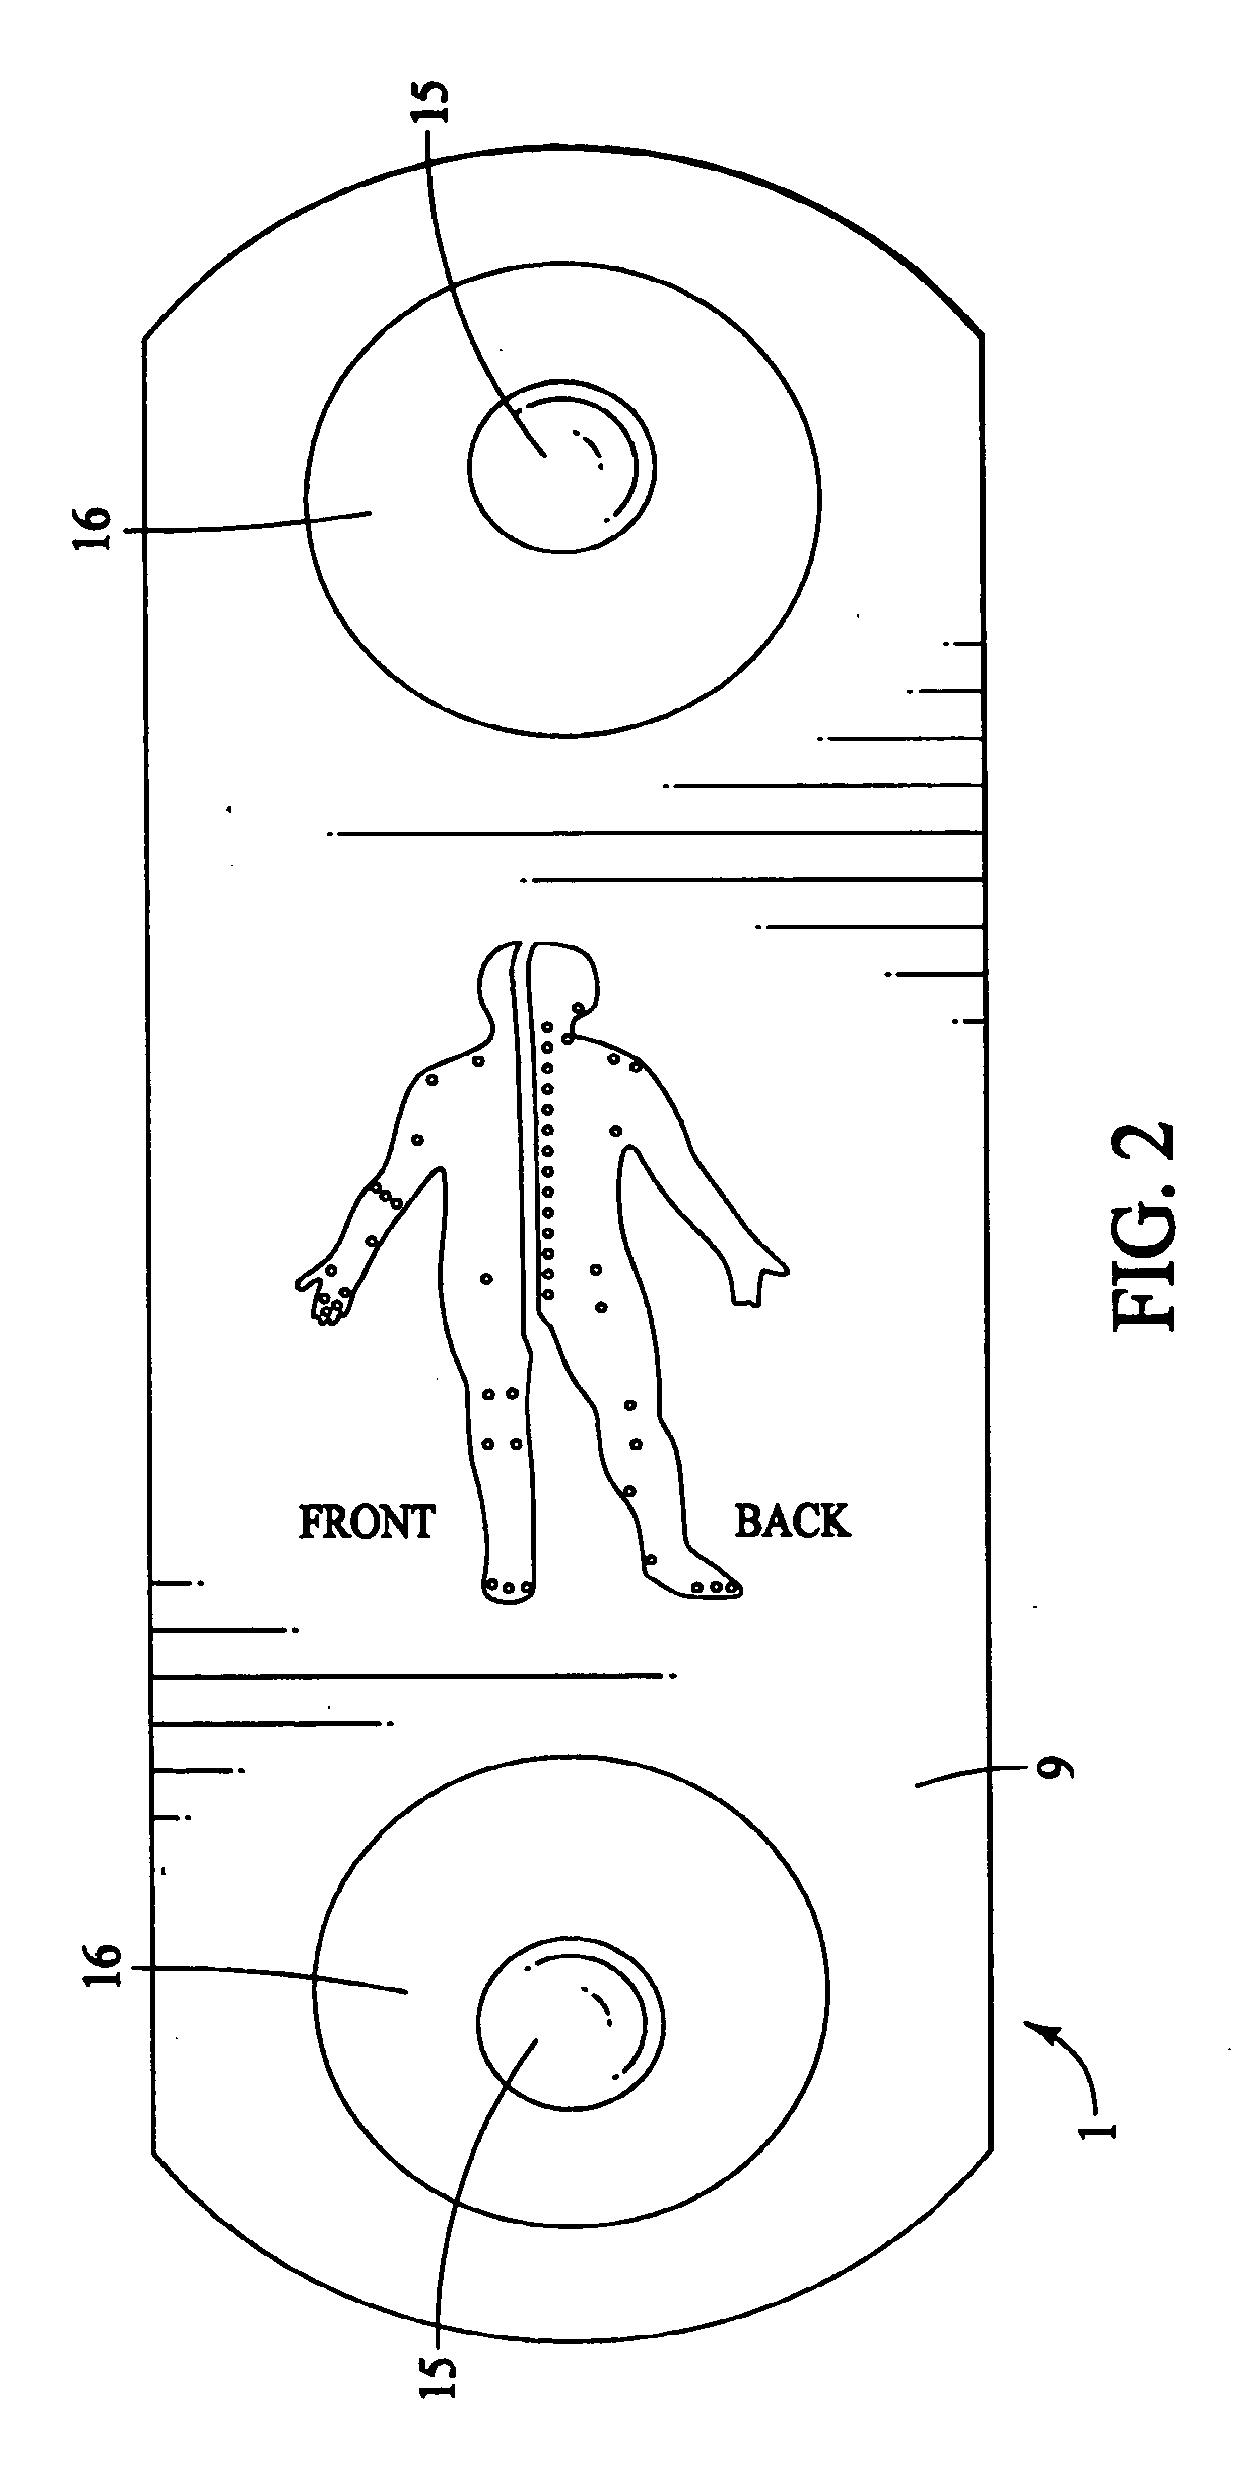 Self-contained electronic musculoskeletal stimulation apparatus and method of use